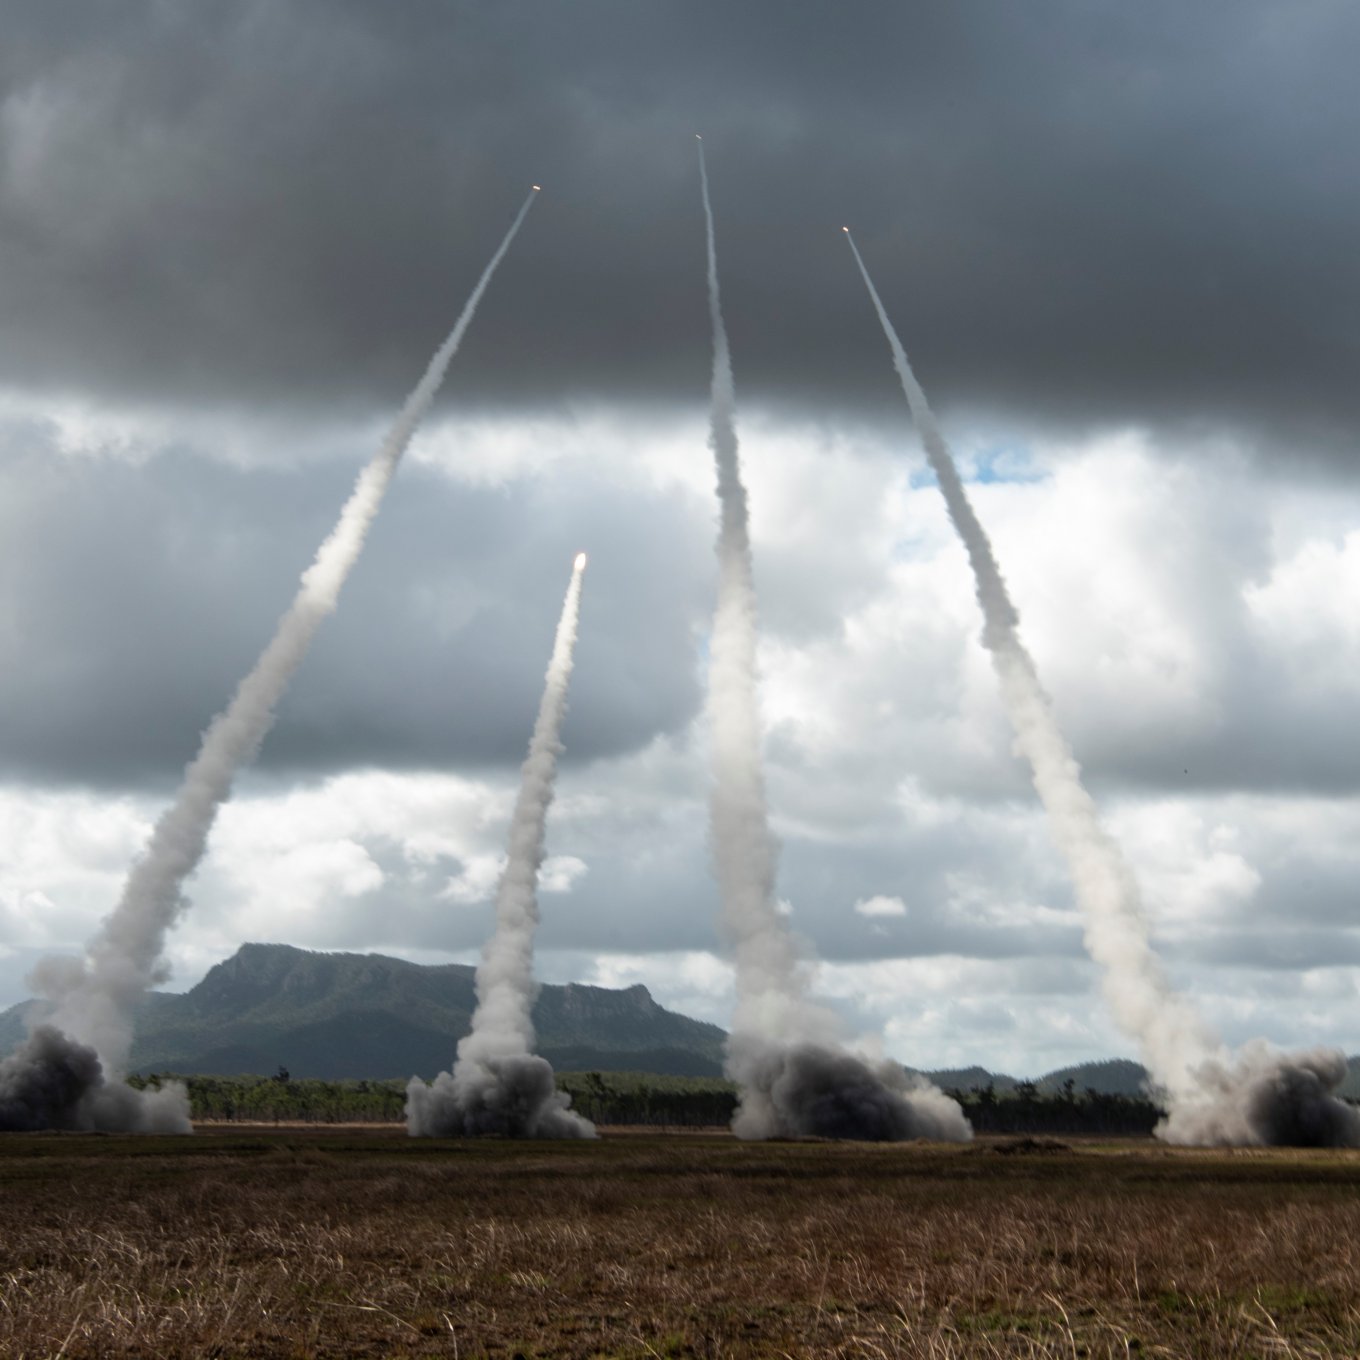 Simultaneous launch of multiple missiles from M142 HIMARS